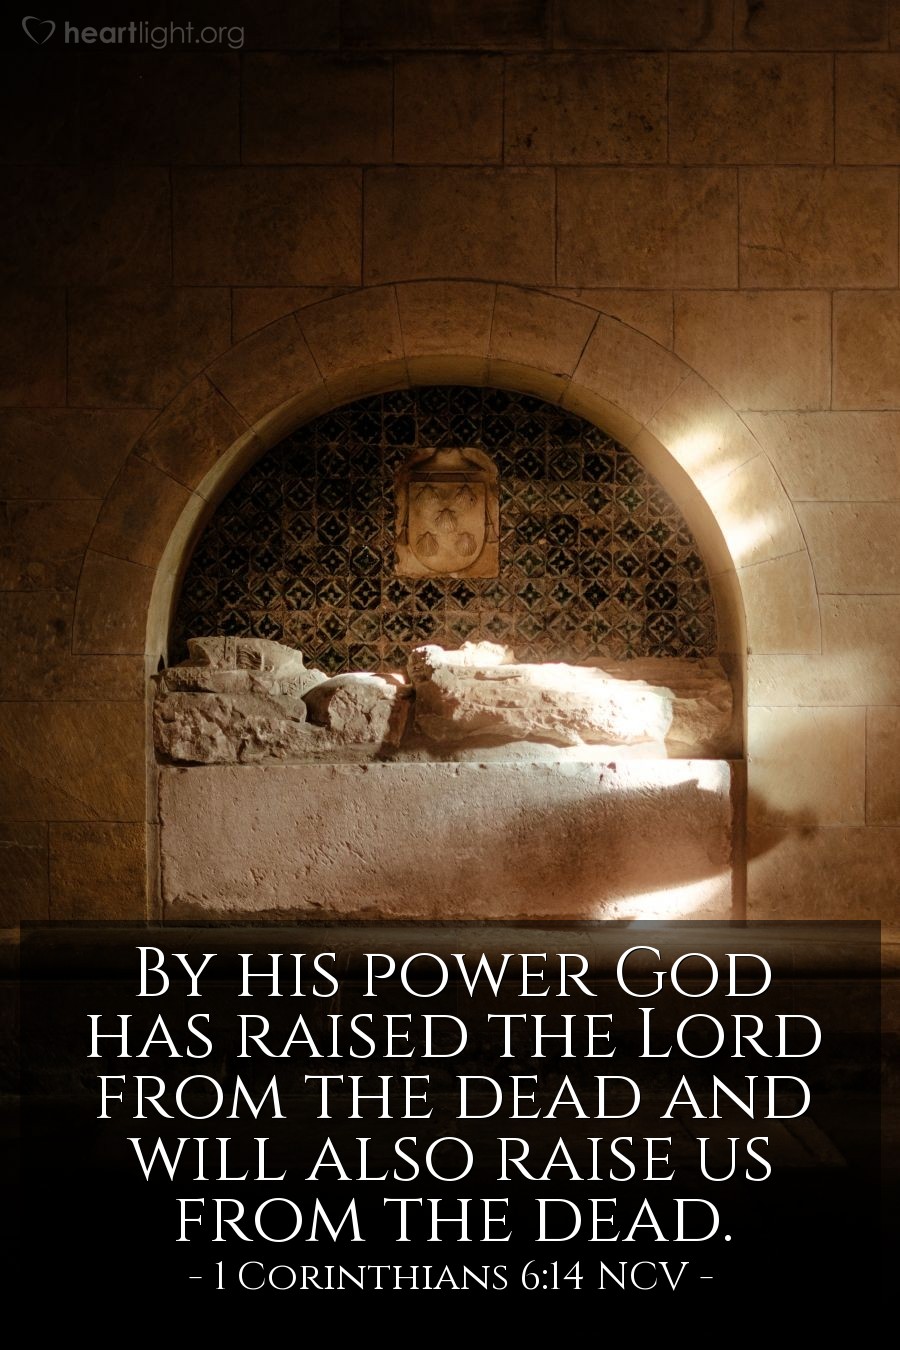 Illustration of 1 Corinthians 6:14 NCV — By his power God has raised the Lord from the dead and will also raise us from the dead.